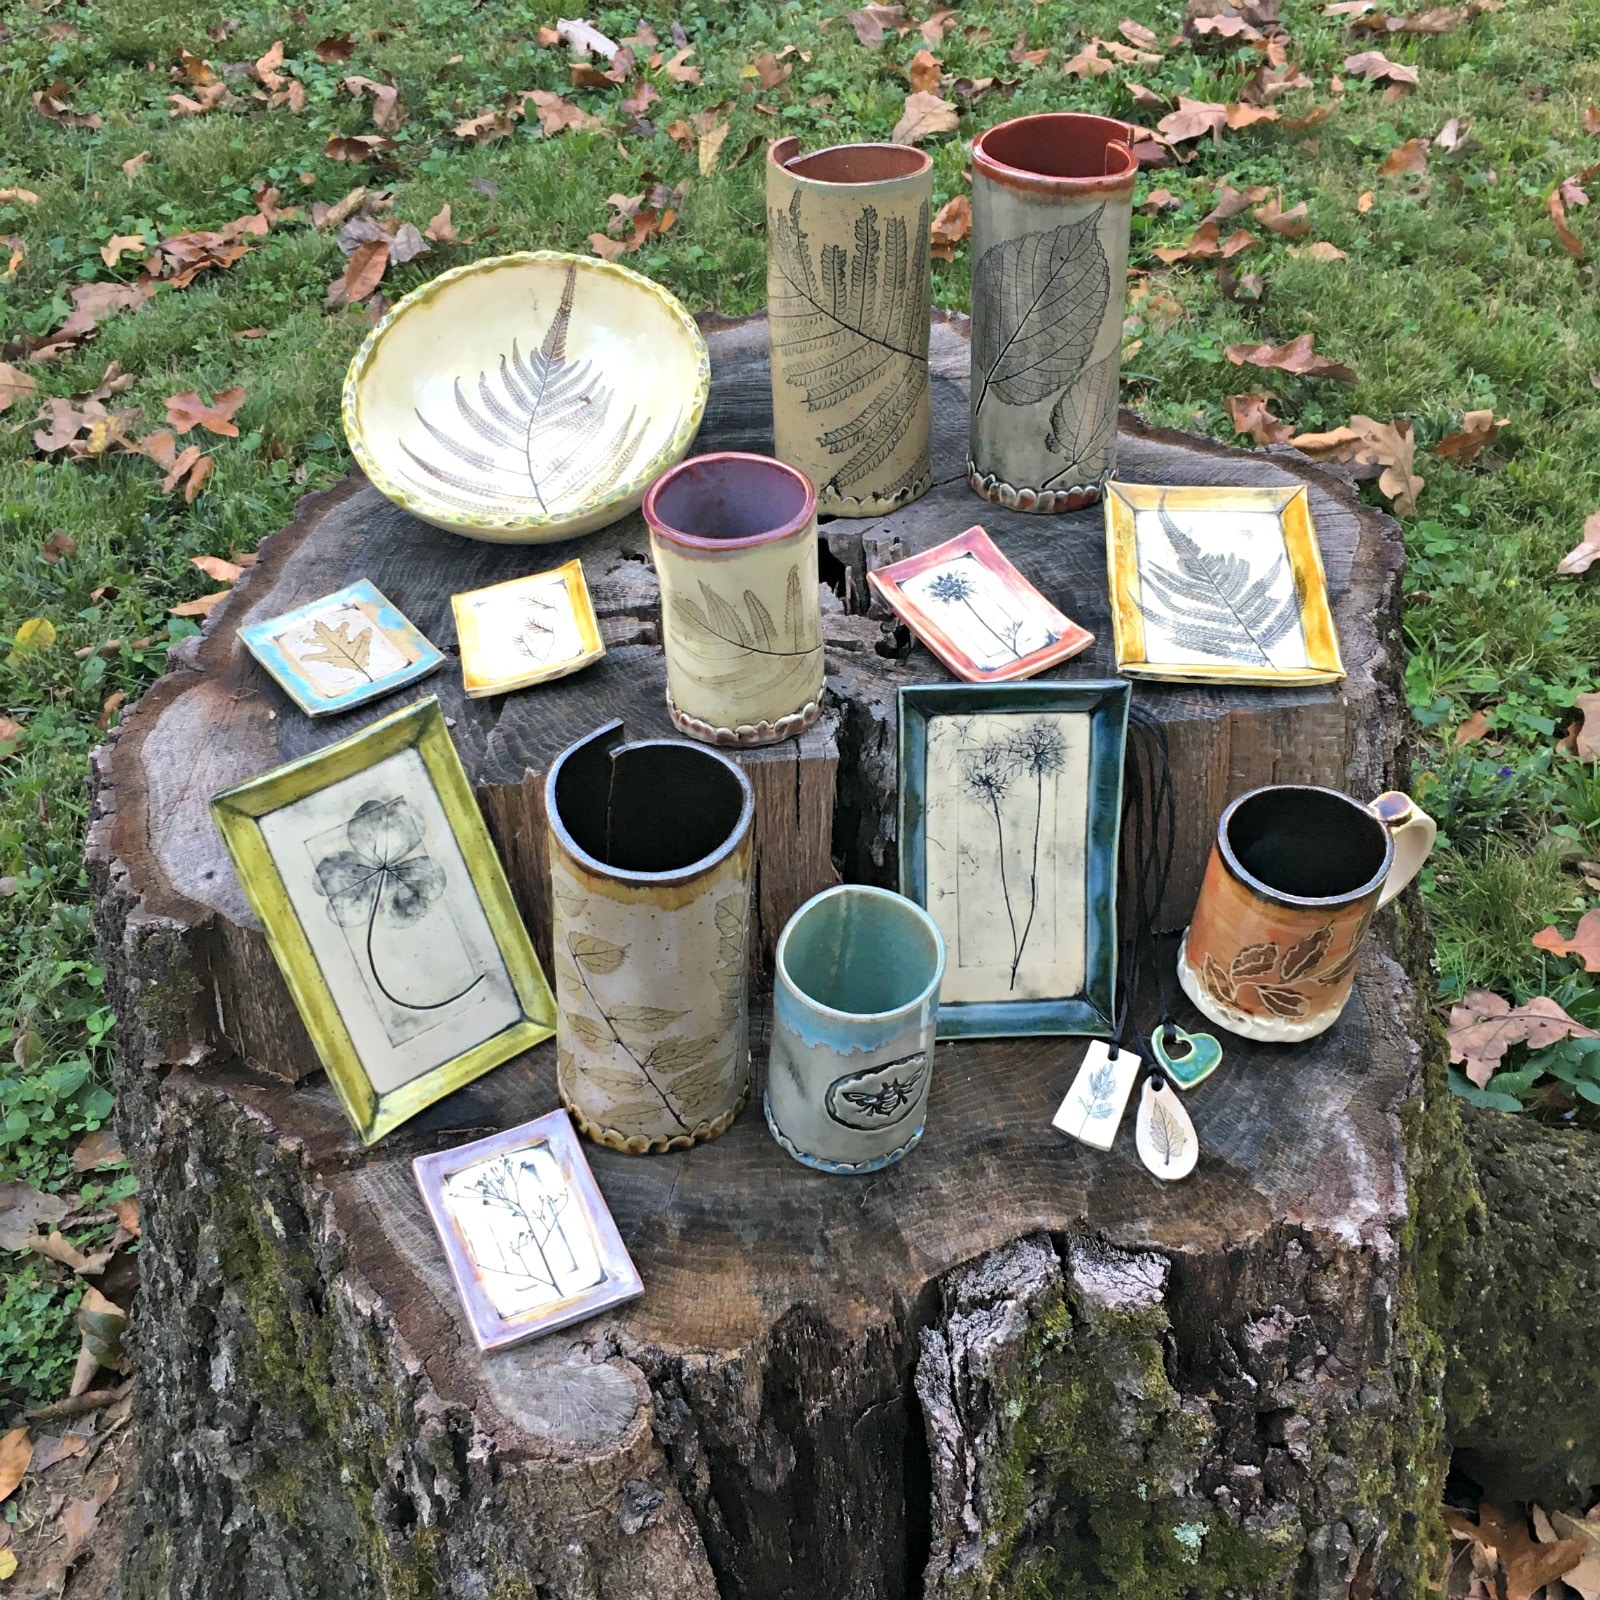 One of the Roebuck Springs potters, Shelleigh Buckingham, displayed selected works in her back yard where she finds leaves to press into the clay. 